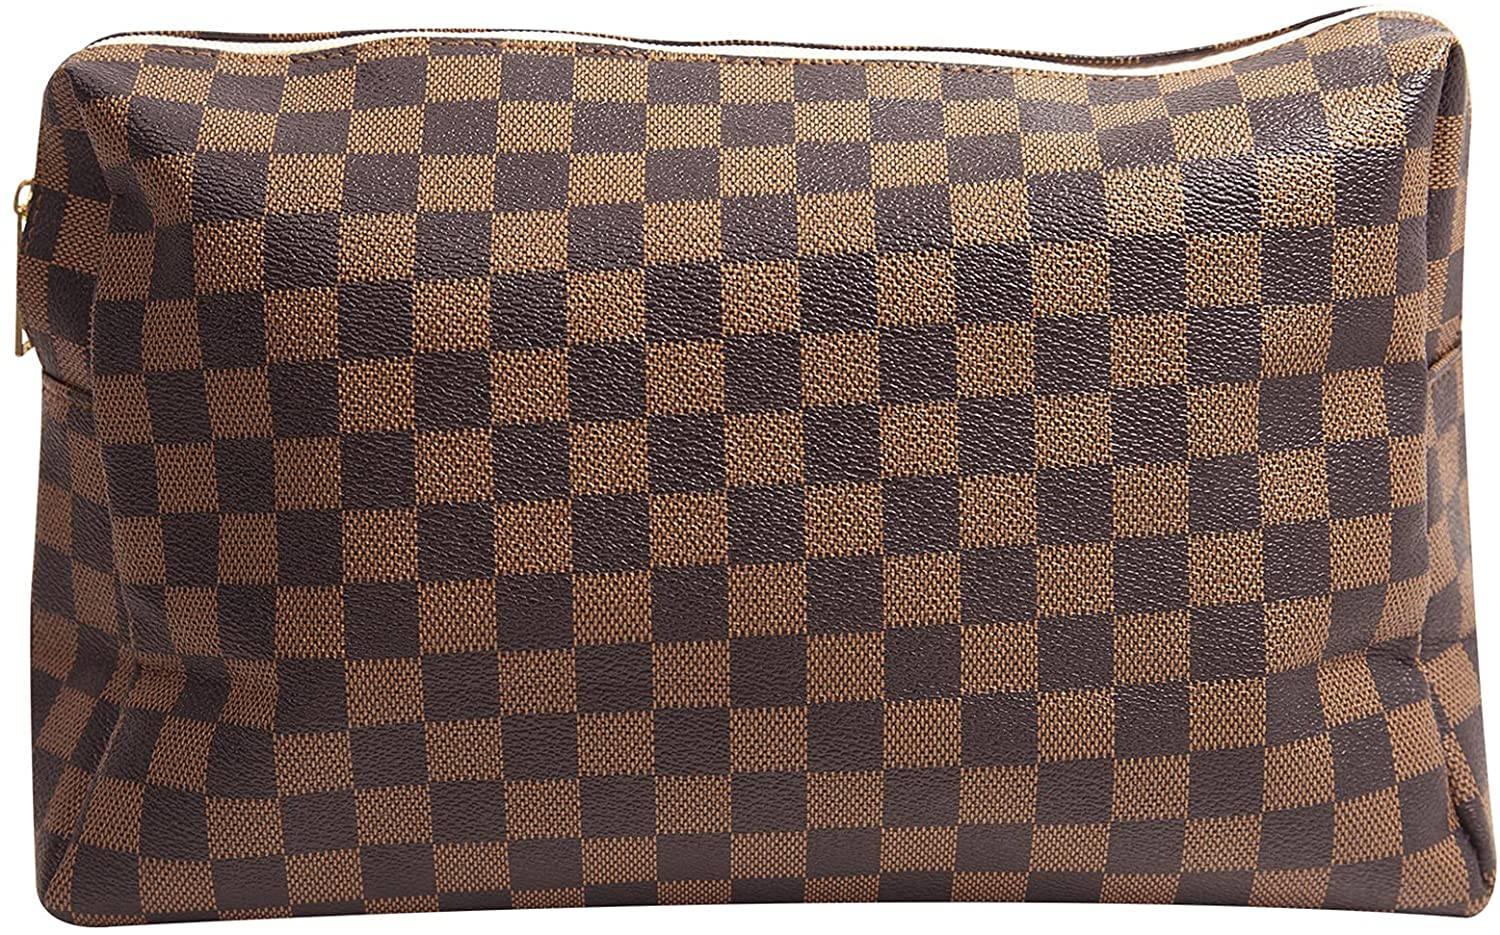 Checkered Travel Makeup Bag, Vegan Leather Large Retro Cosmetic Pouch, –  SHECAGO BEAUTY SOURCE